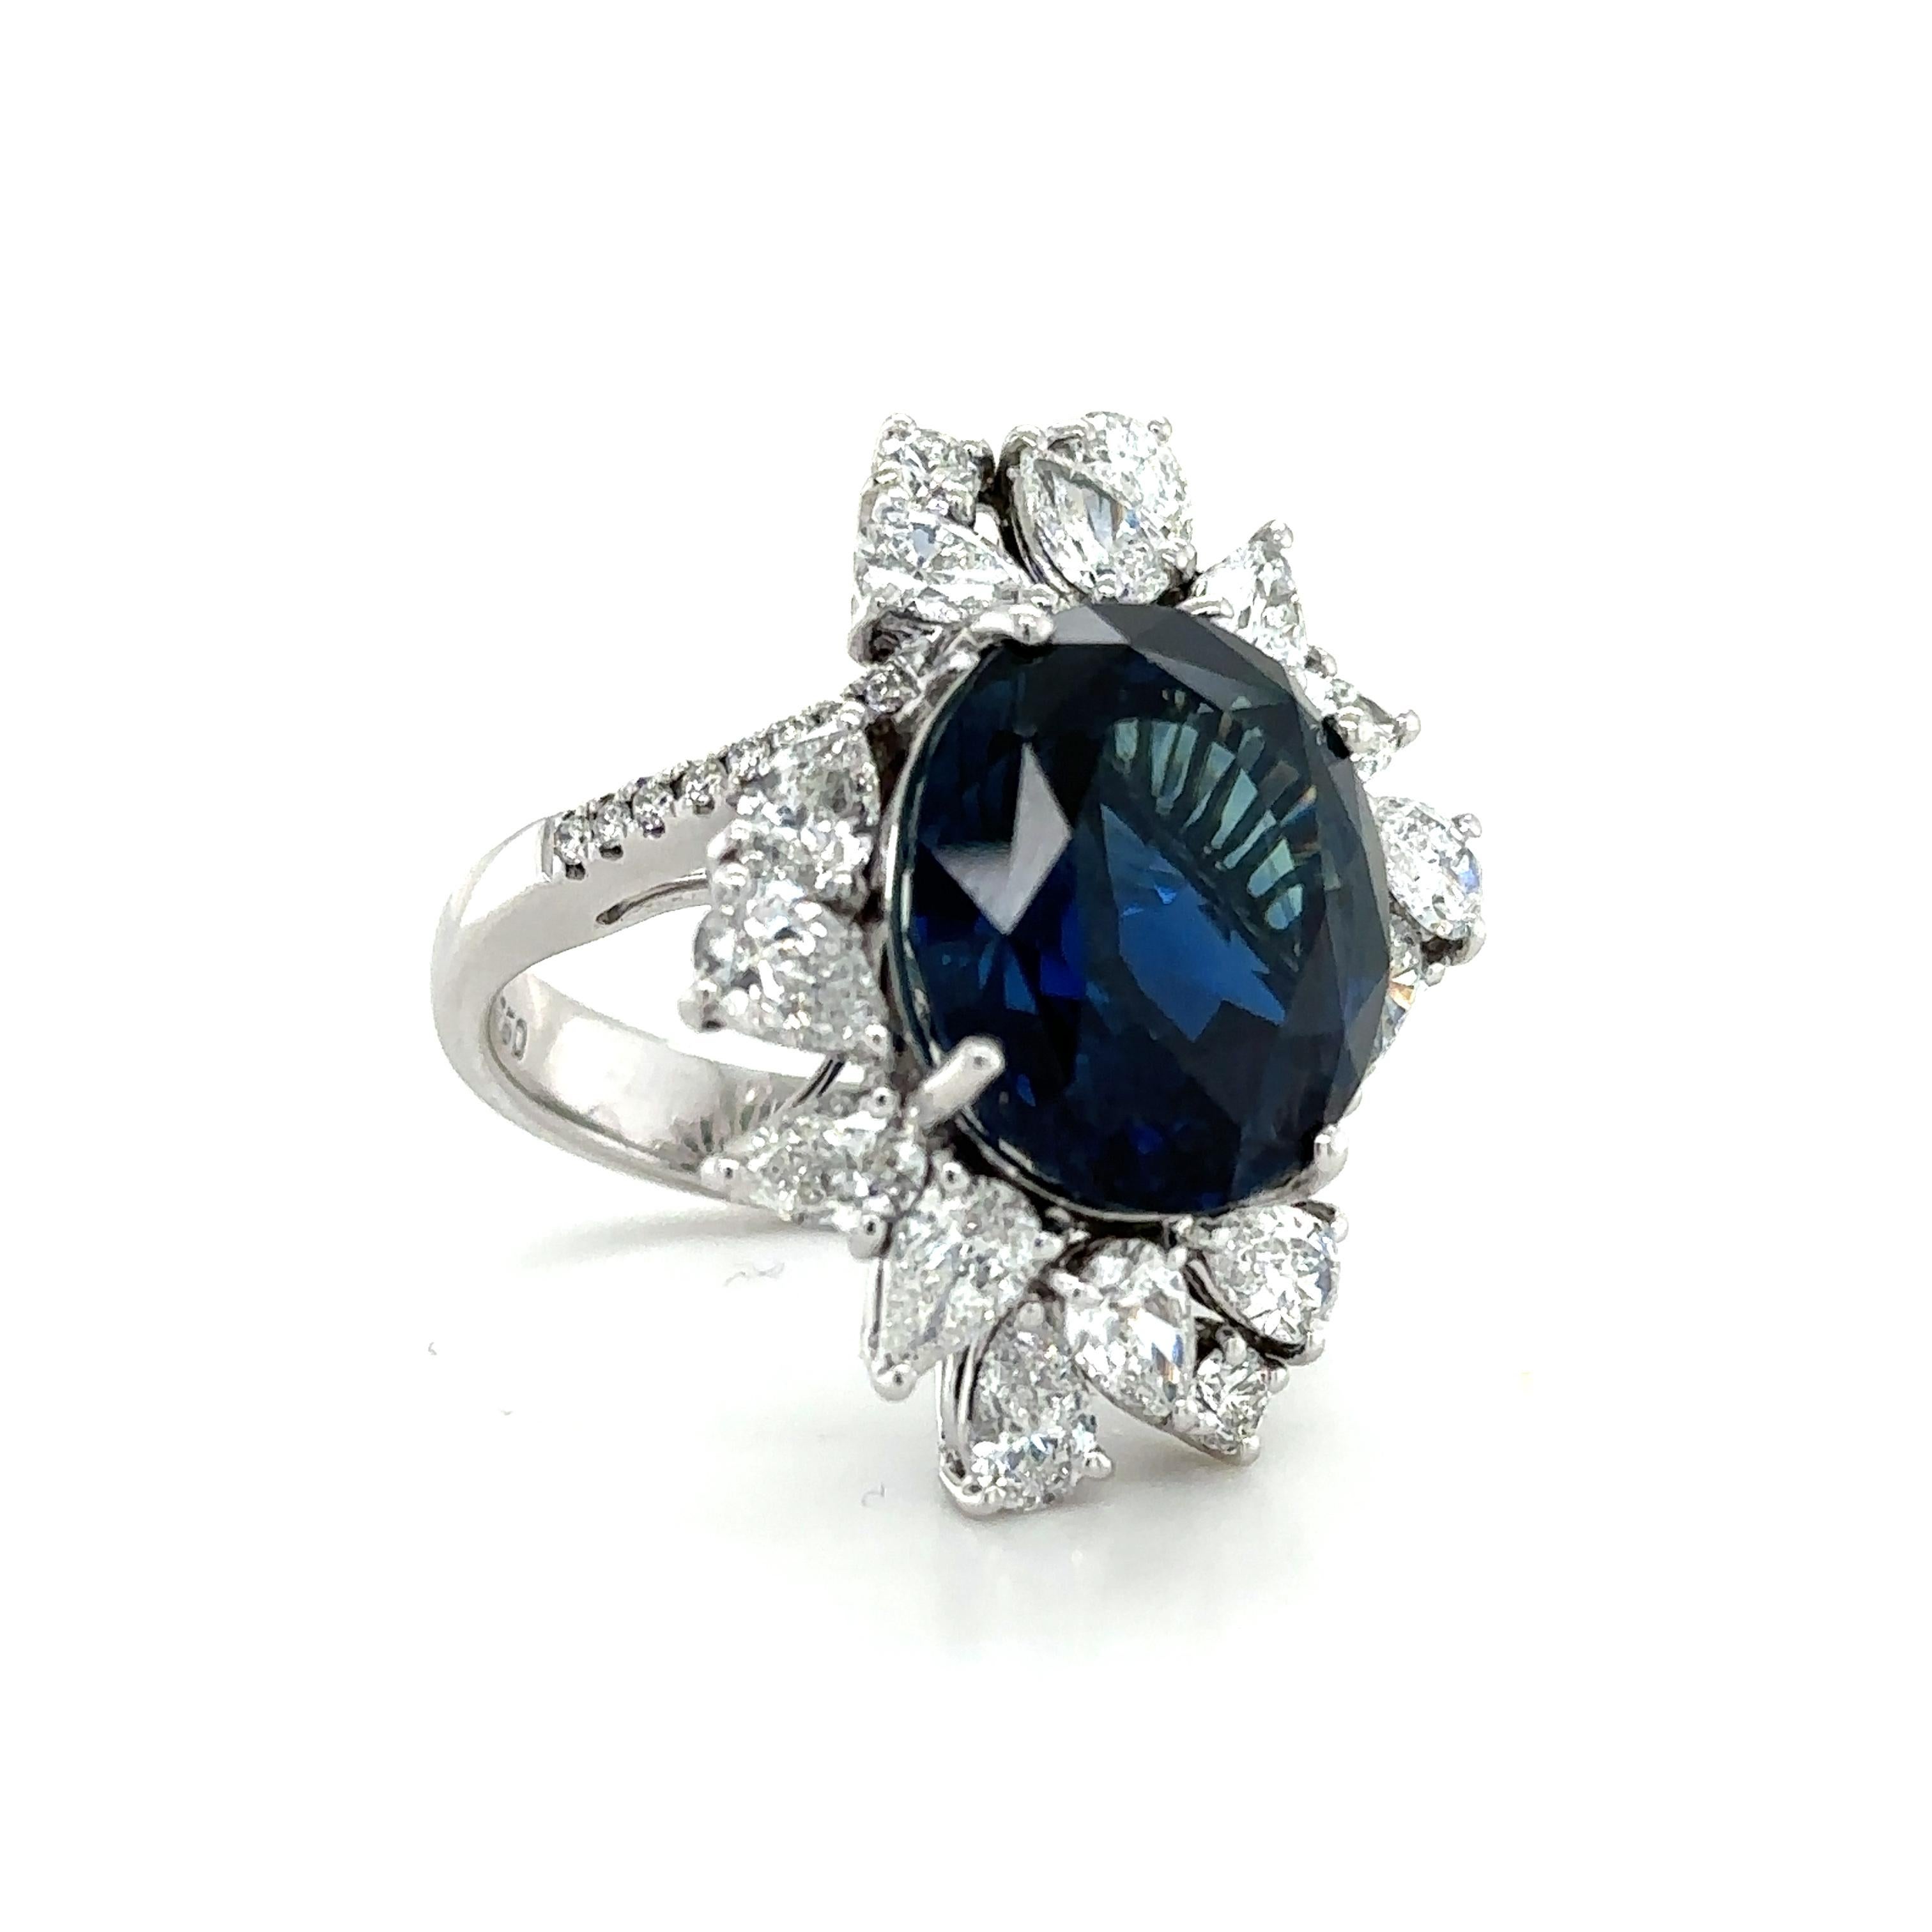 An exquisite ring set in 18k white gold, featuring a 15.57ct. Oval-cut Sapphire, surrounded by a total of 2.71ct of pear shaped diamonds, complimented with 0.27ct of round diamonds. 

The Sapphire is graded Deep Blue, a rich blue color, with strong